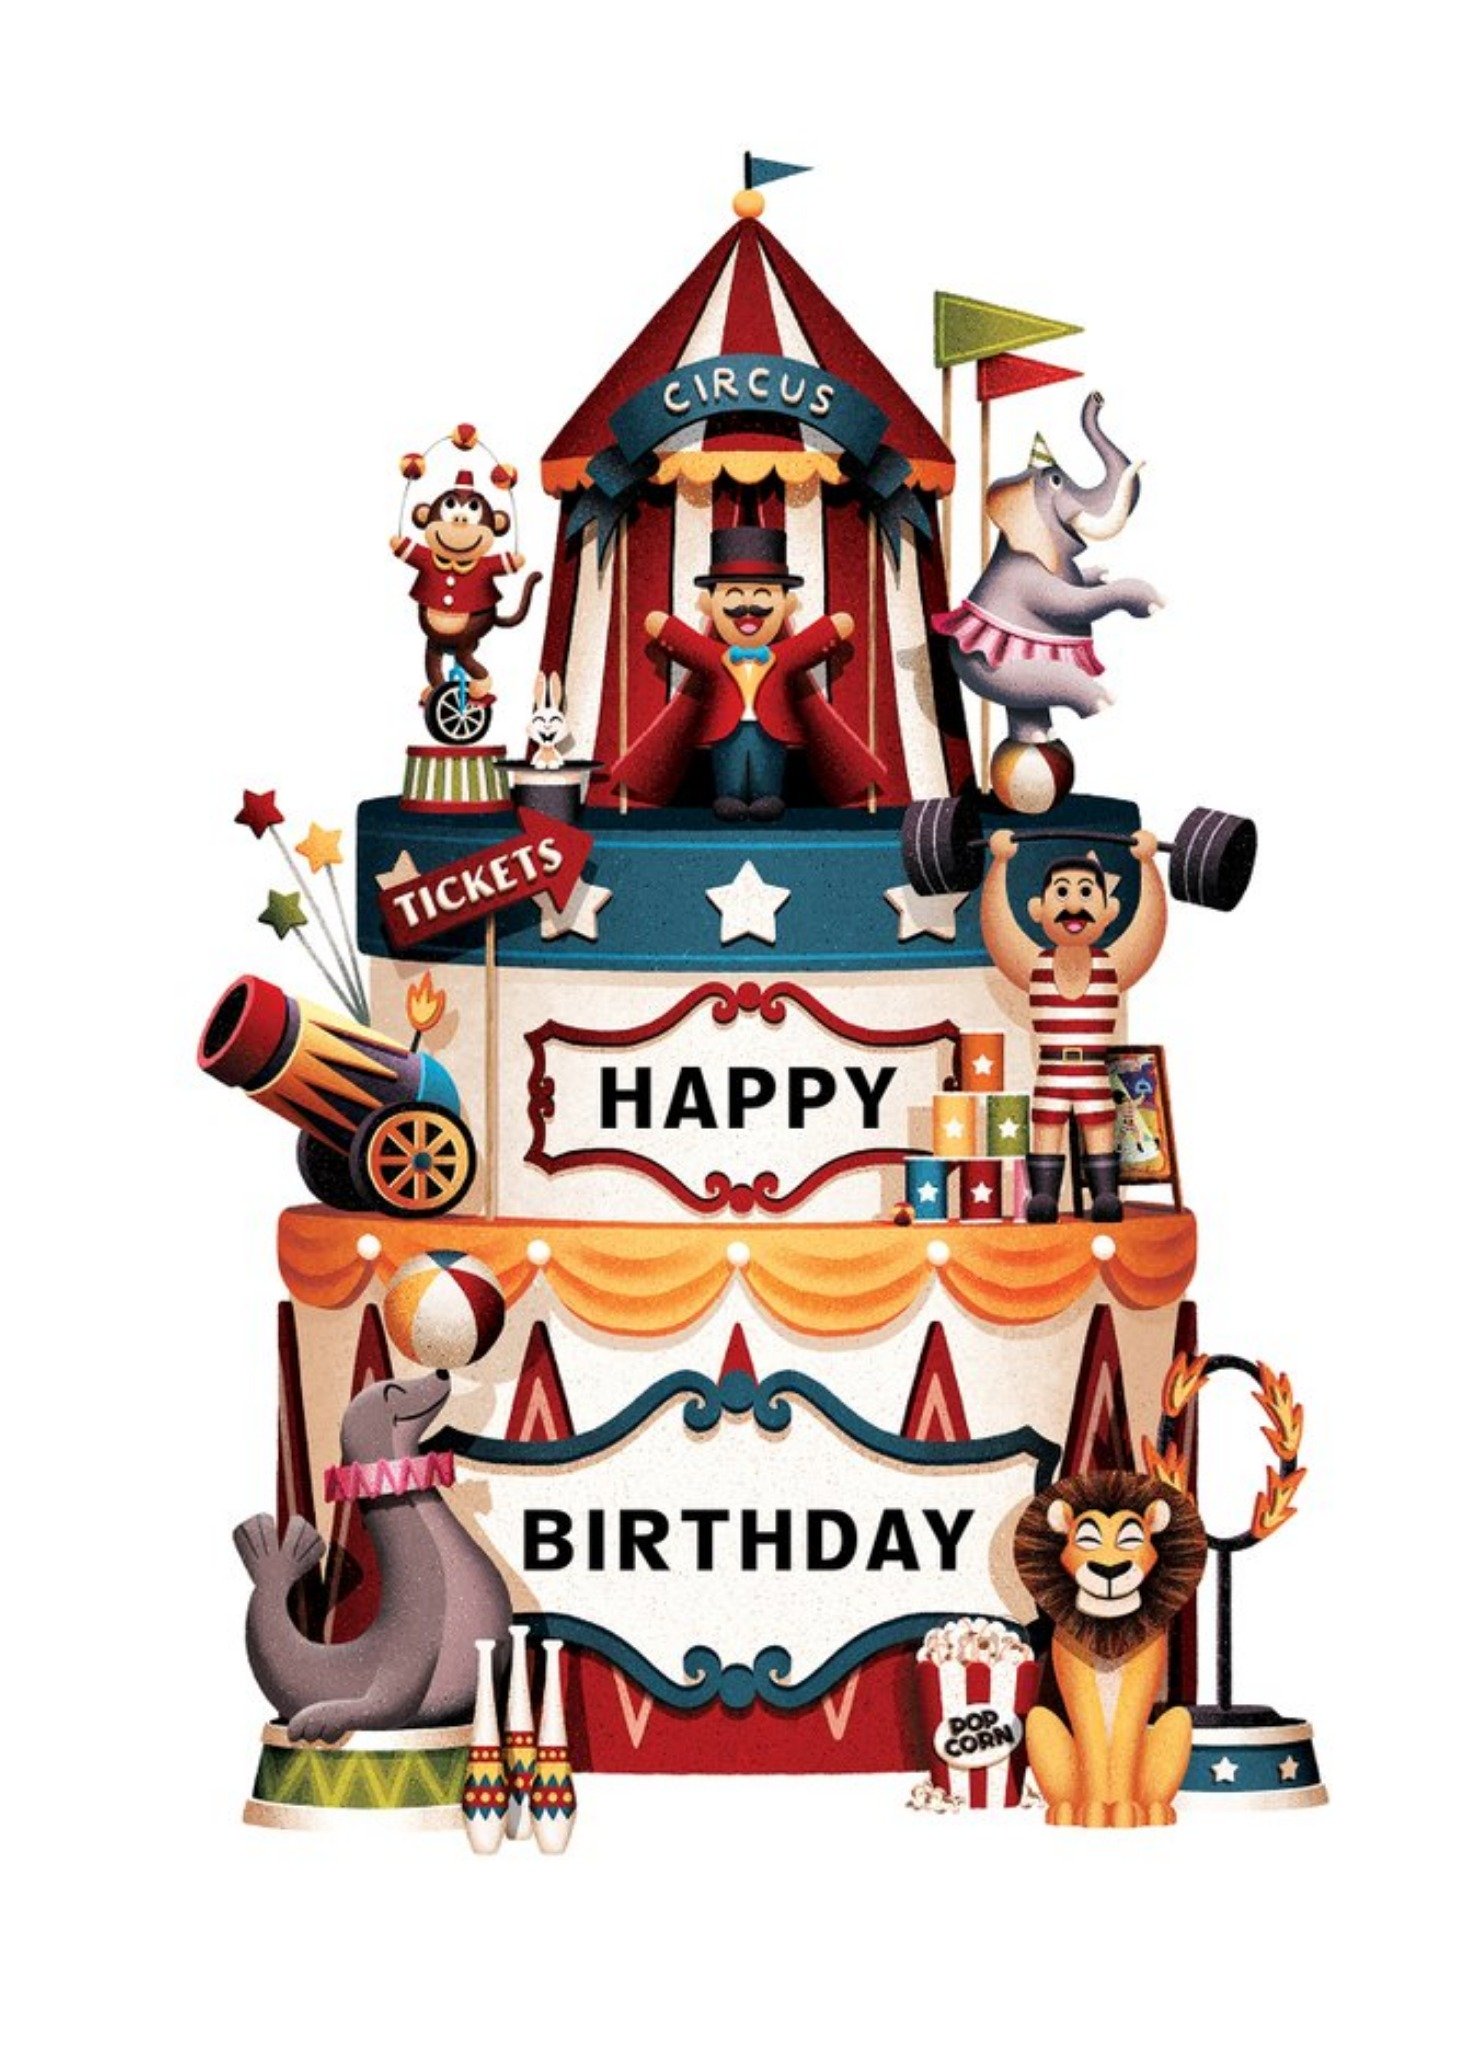 Moonpig Folio Illustrated Circus Tent And Performers. Happy Birthday Card, Large